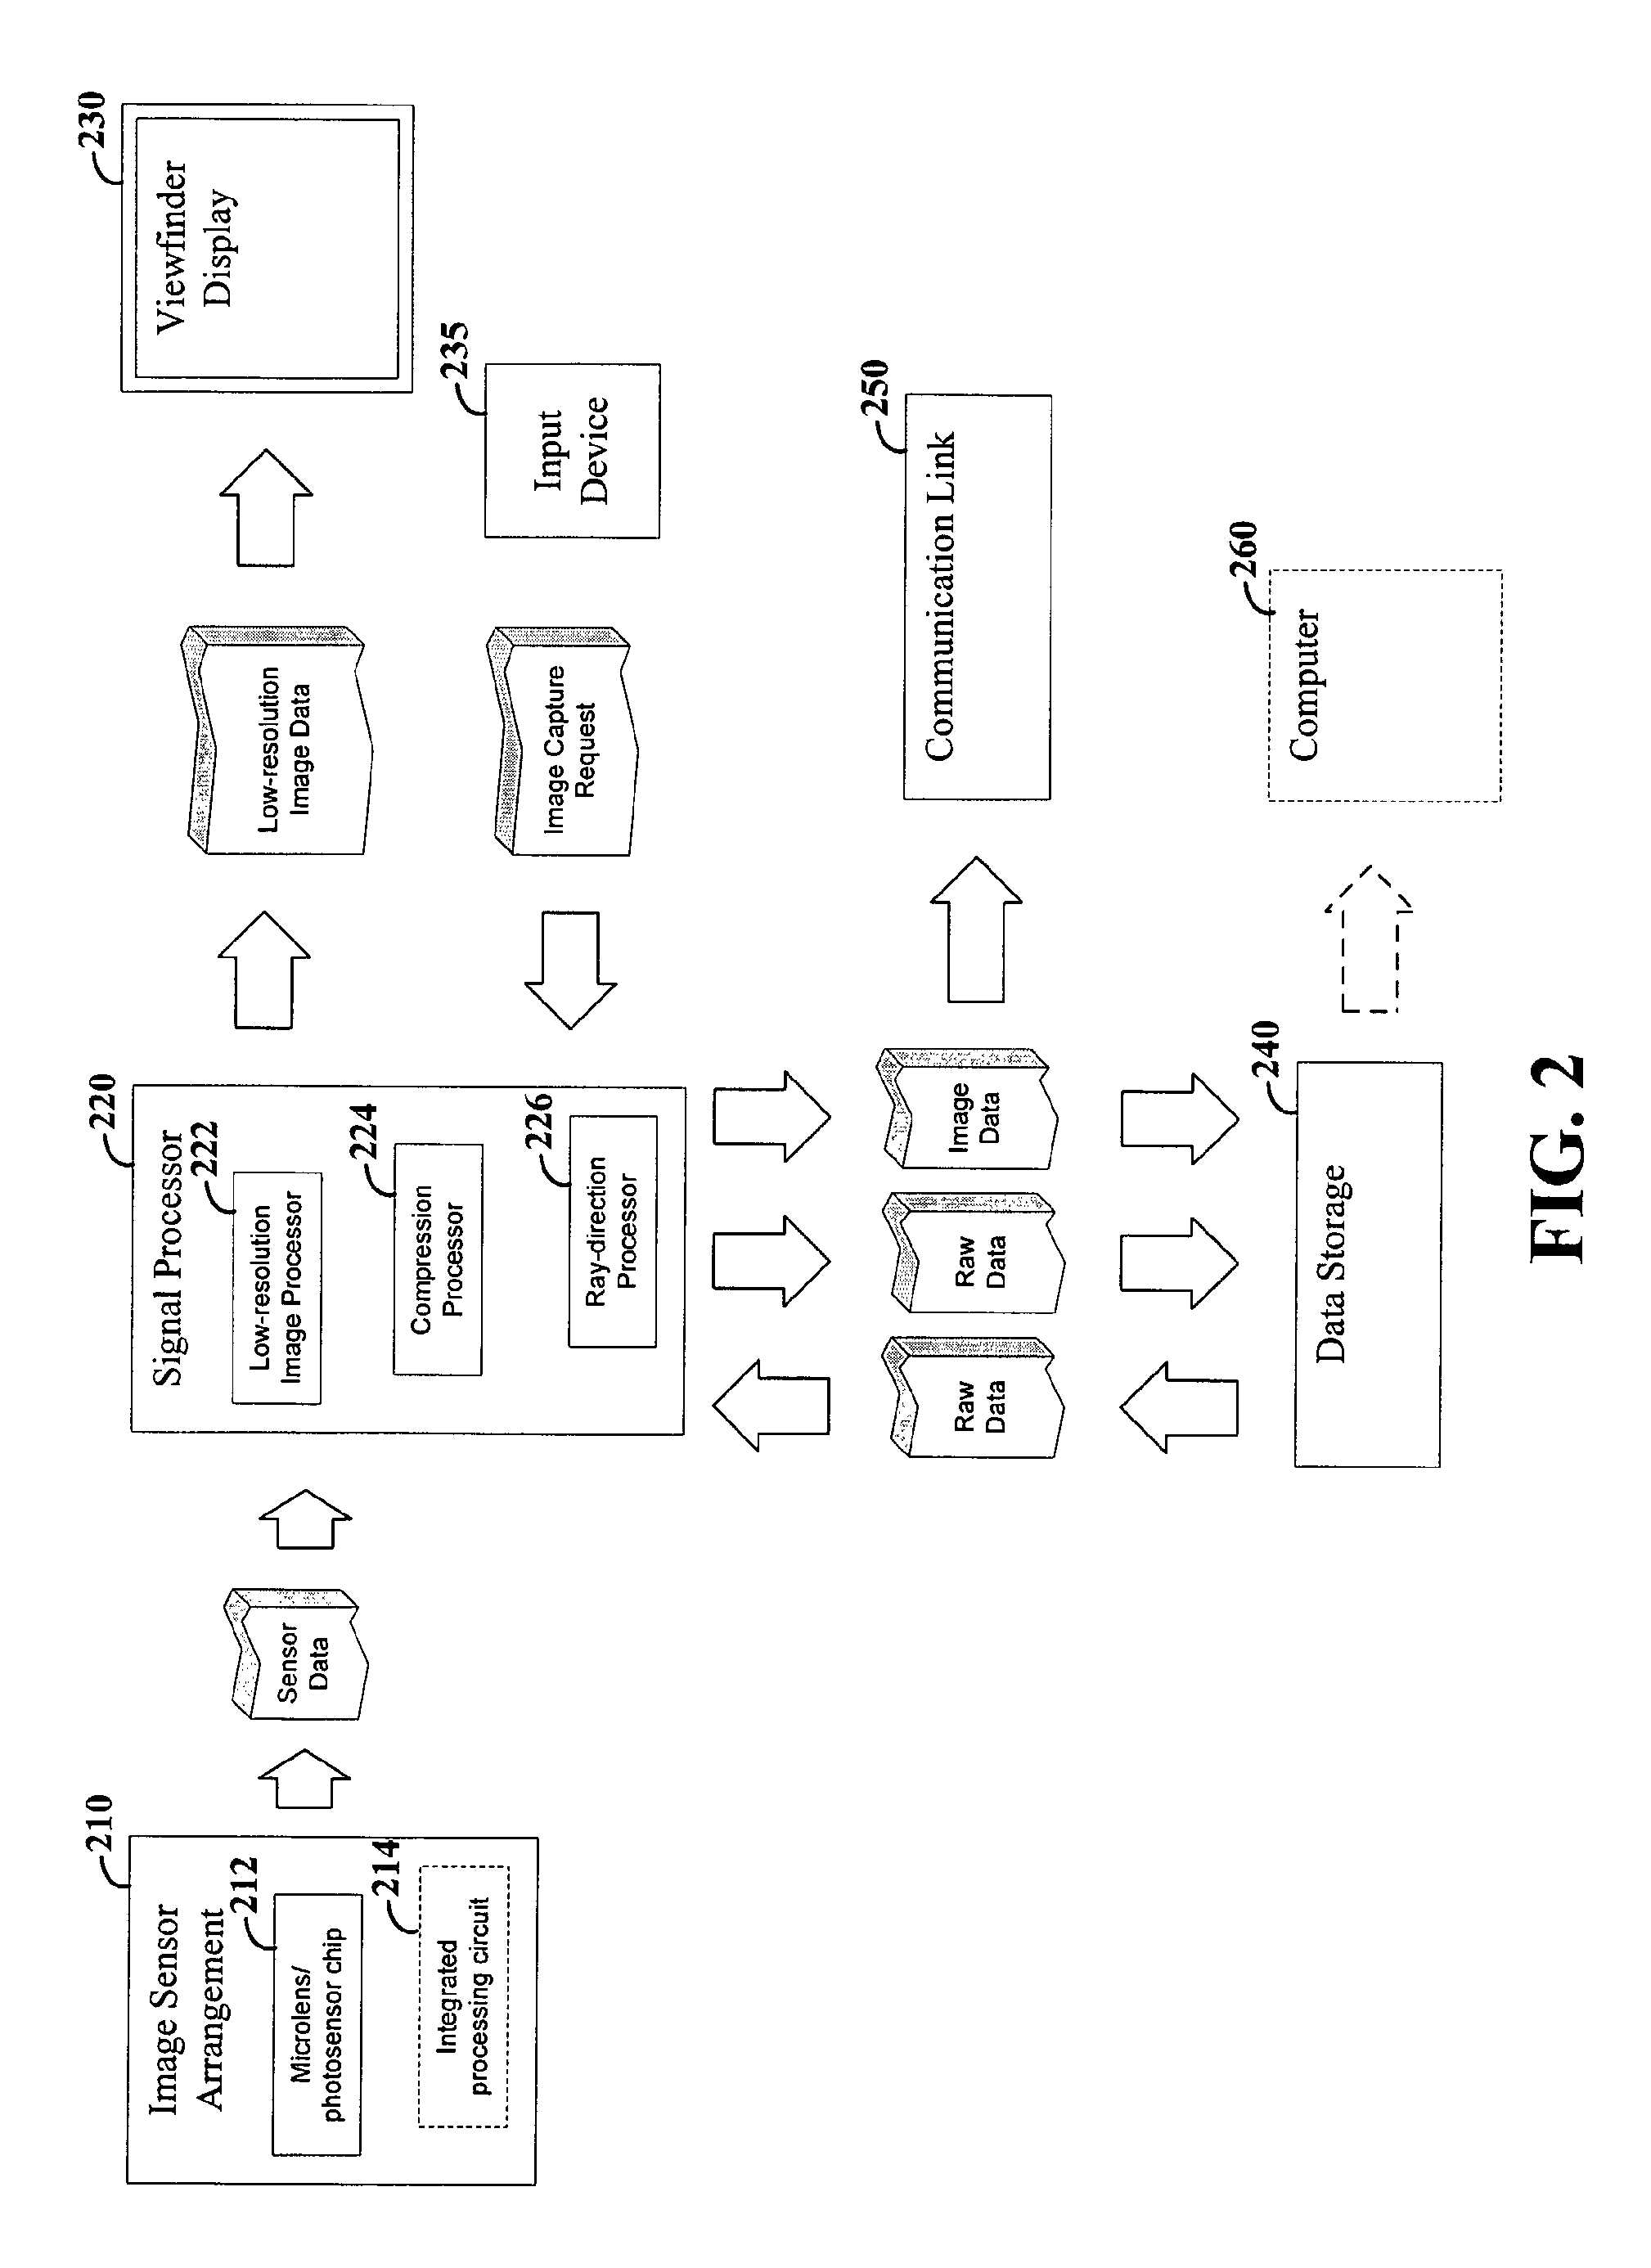 Imaging arrangements and methods therefor